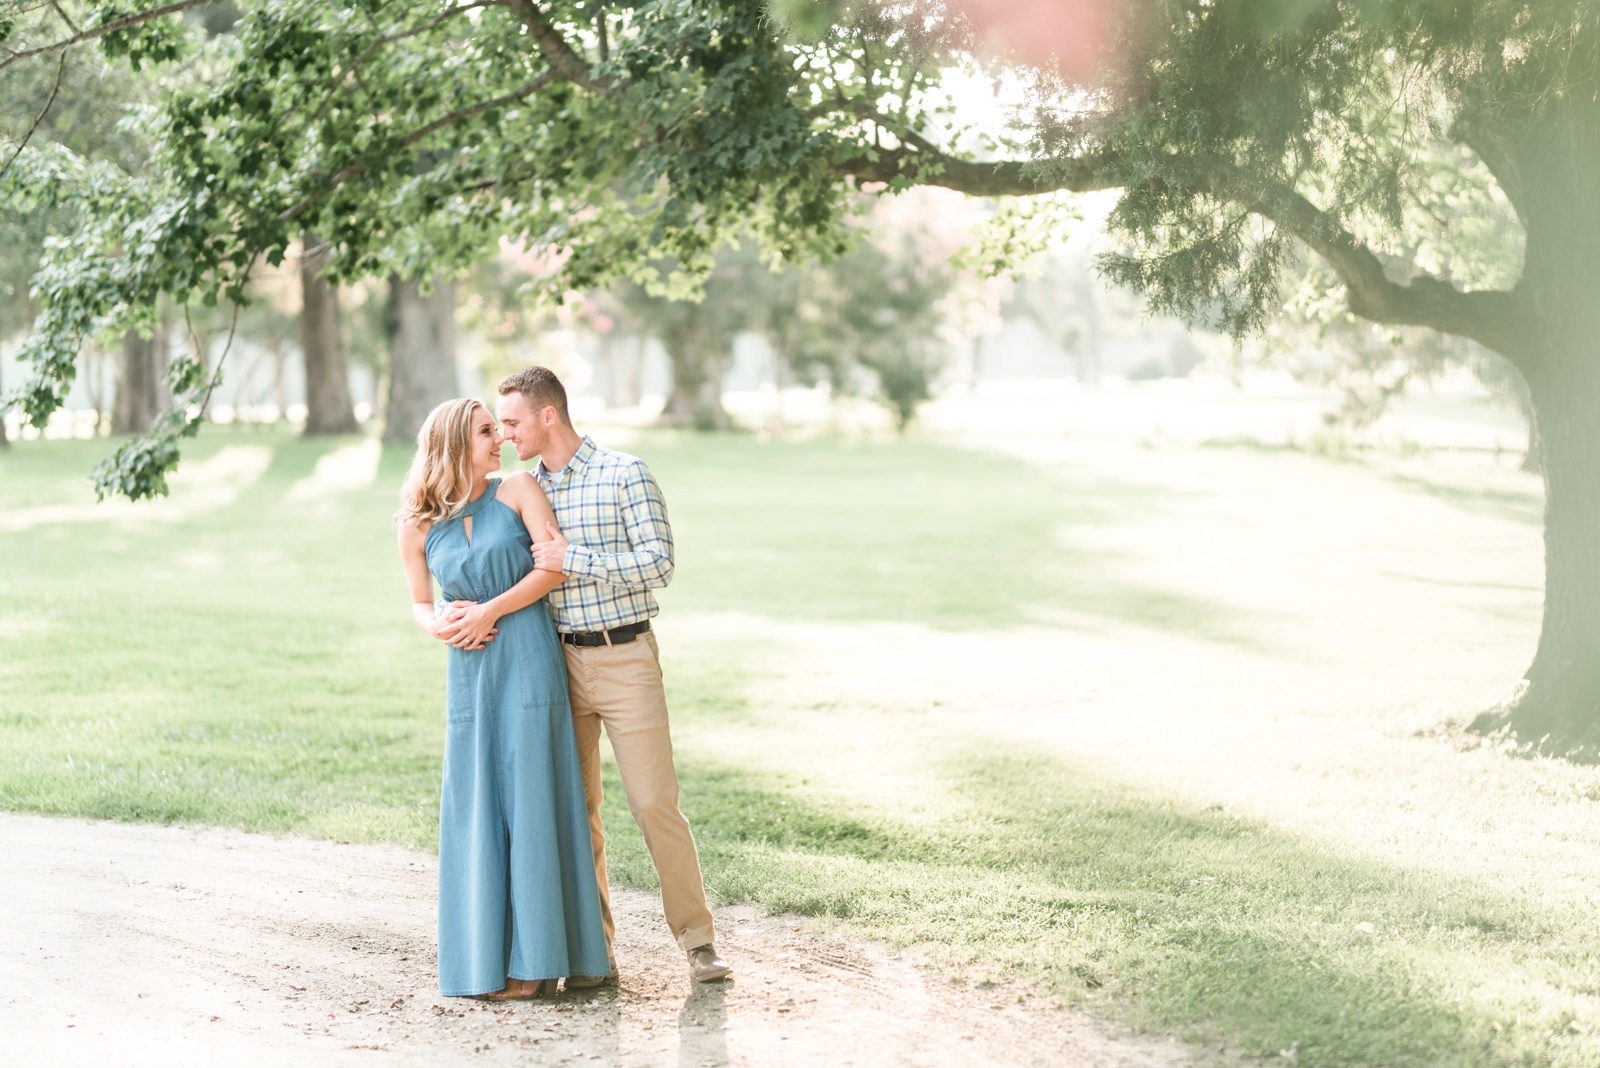 chippokes-plantation-southern-virginia-engagement-session-photo_0916.jpg